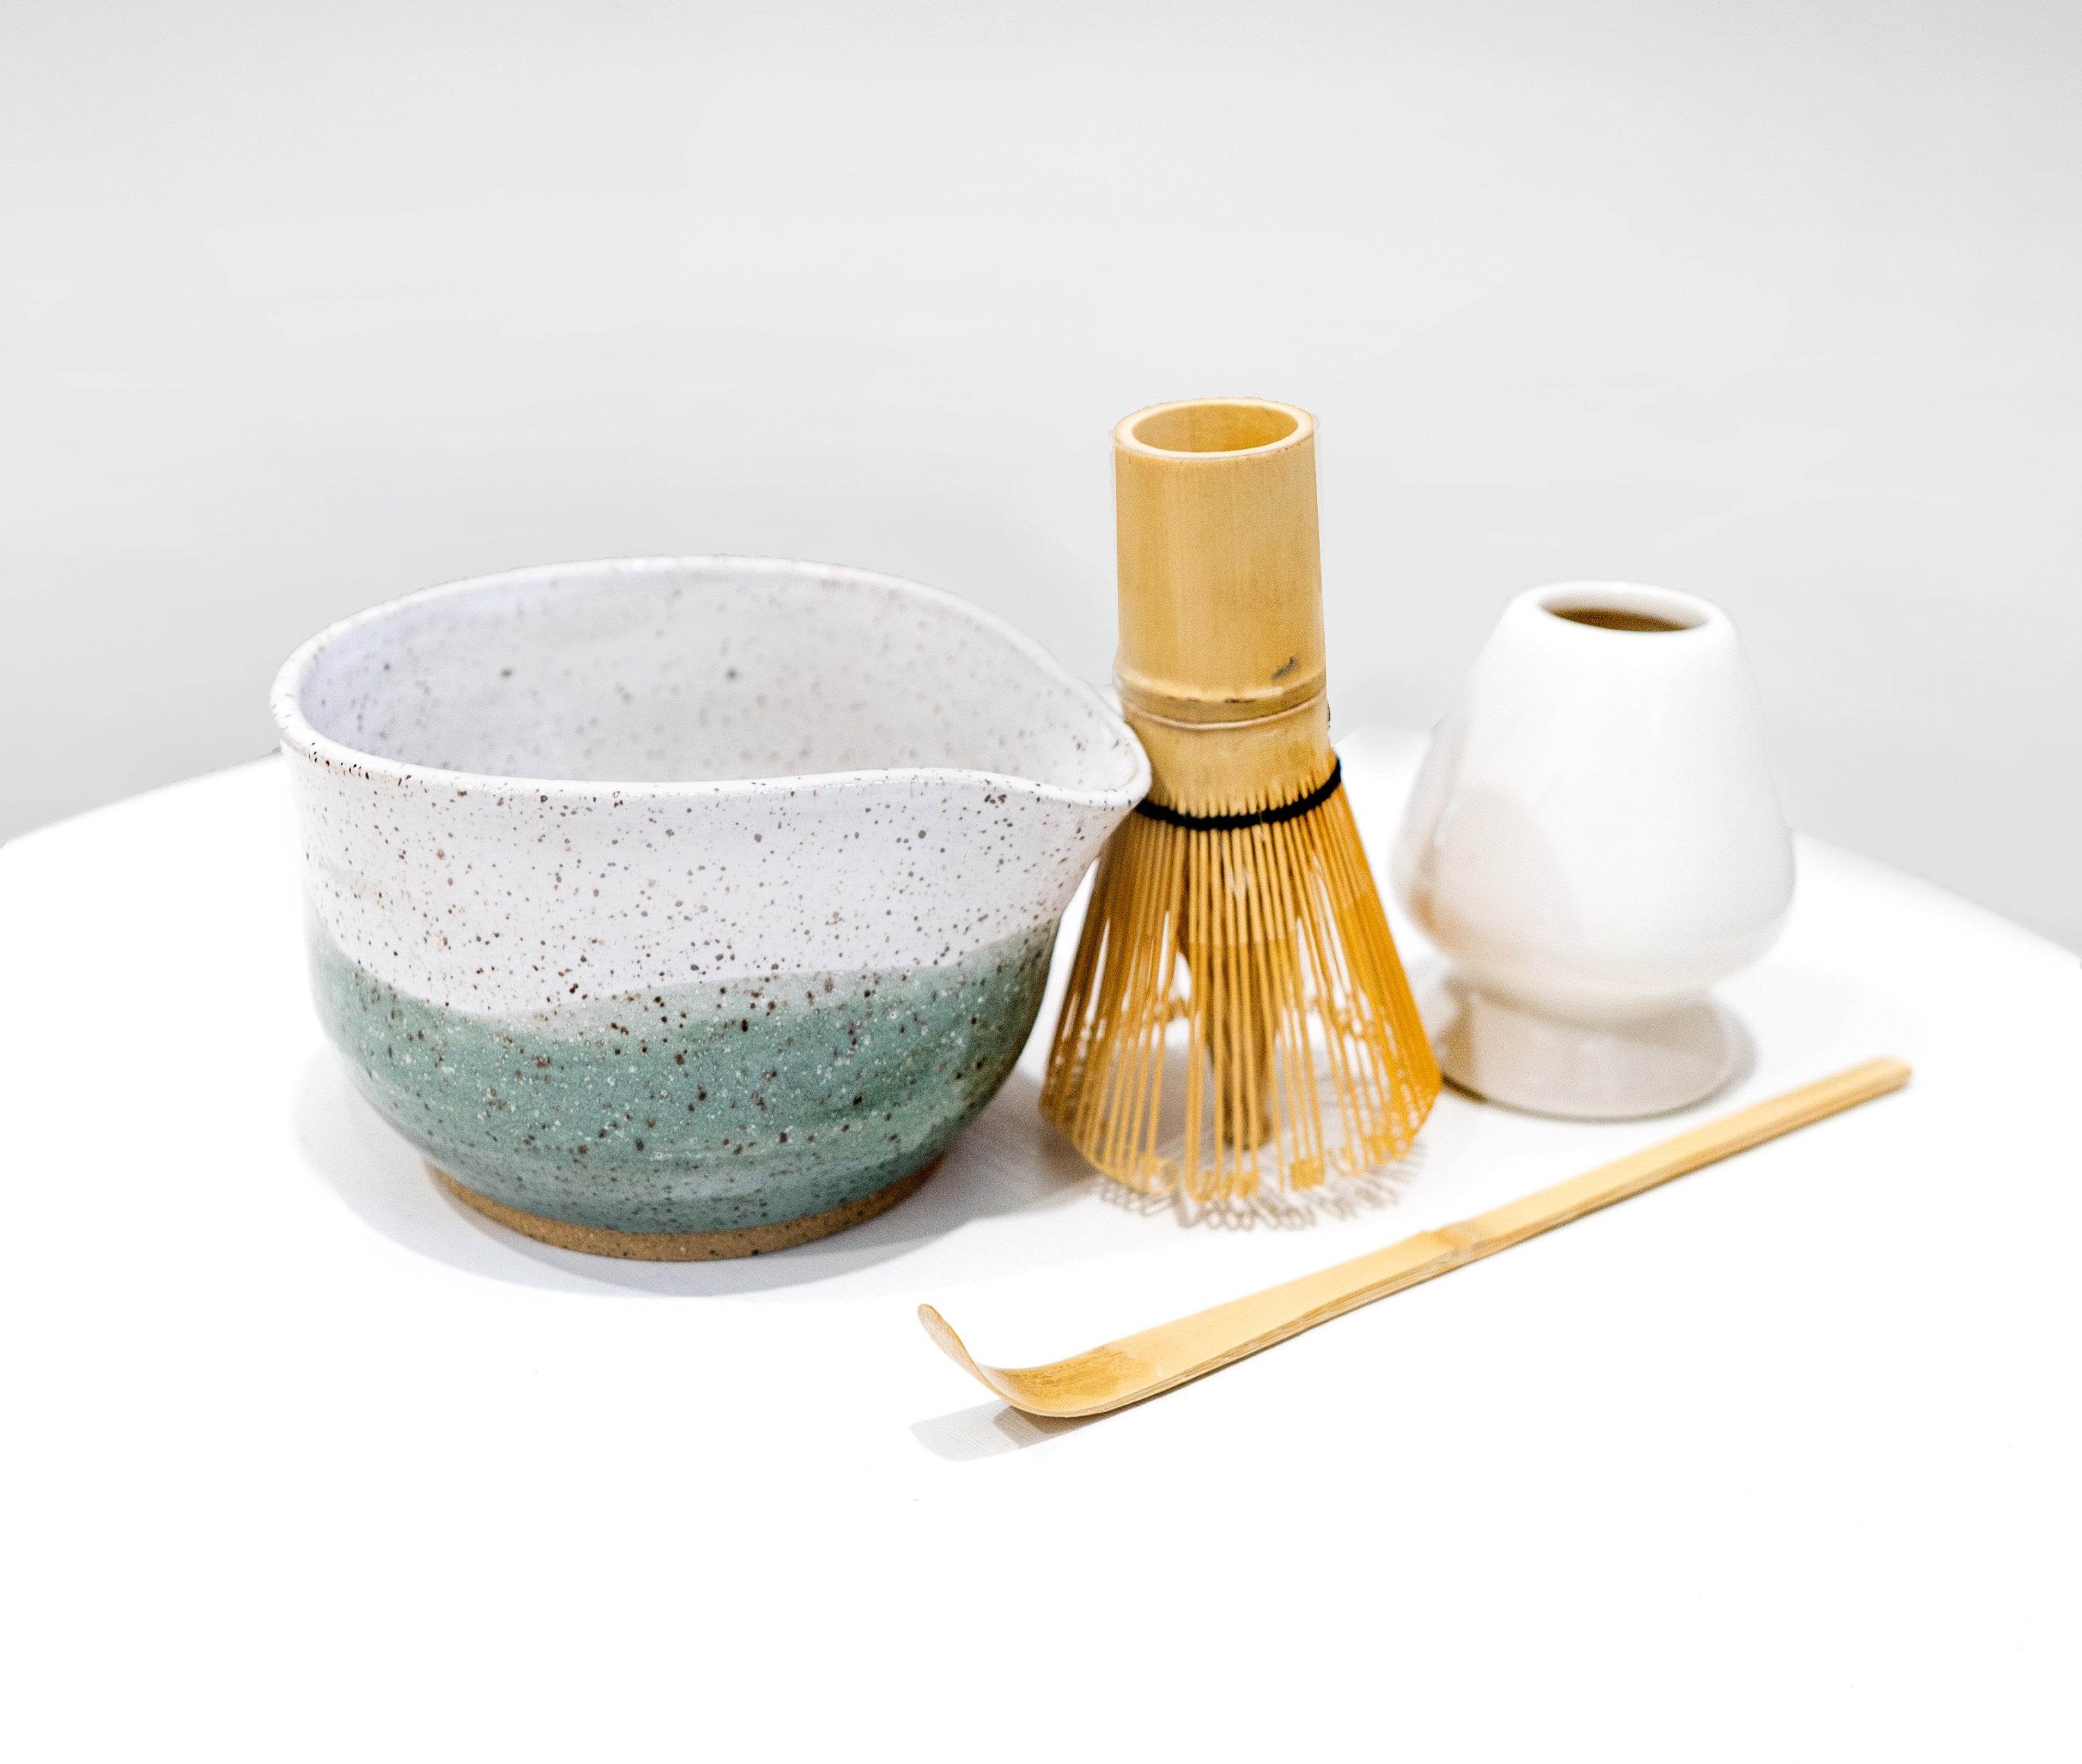 Ceramic Matcha Bowl Gift Set, Speckled Green and White, Bowl With Spout,  Whisk Holder Stand, Scoop, Japanese Chawan and Chasen 